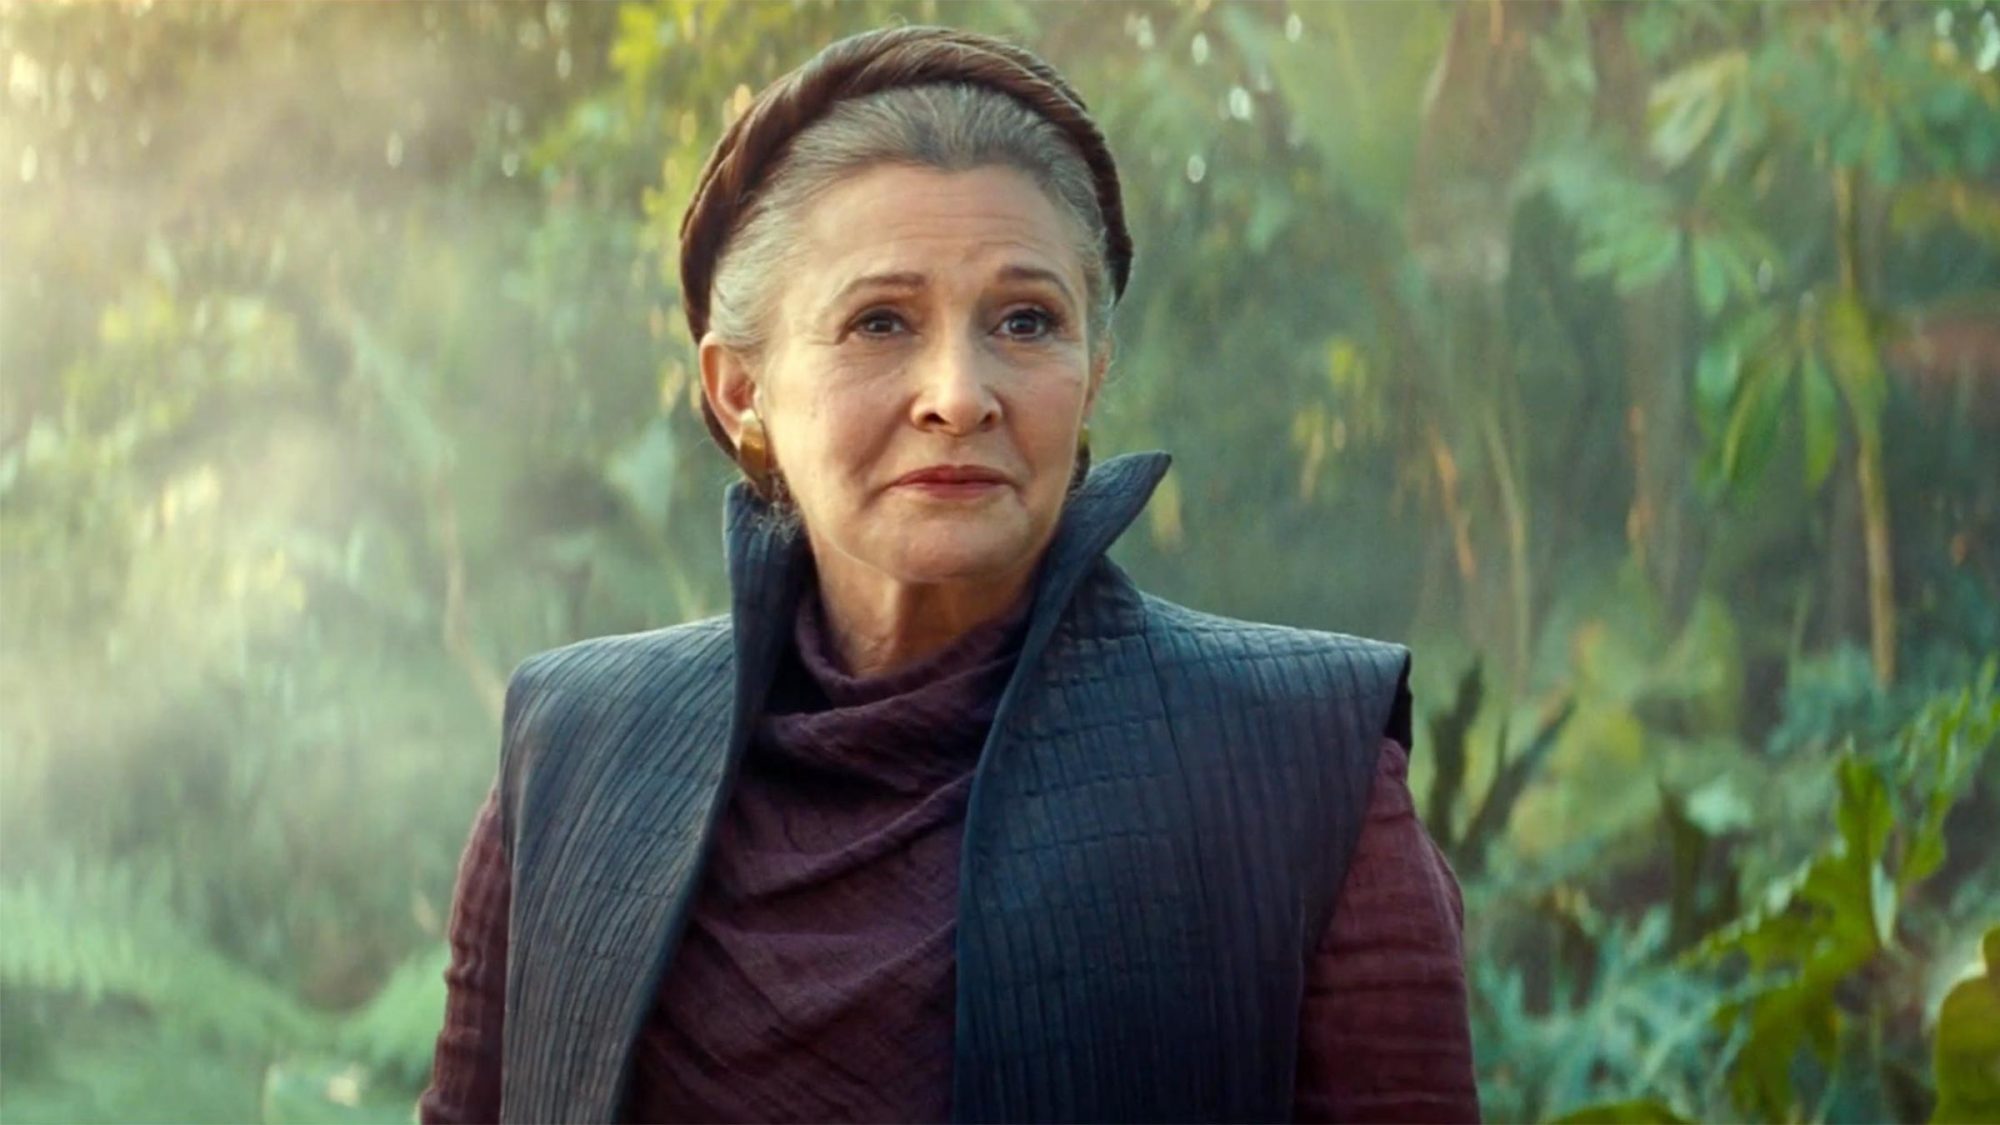 Disney Legend Carrie Fisher to be Honored on May 4th With Star on The Hollywood Walk of Fame